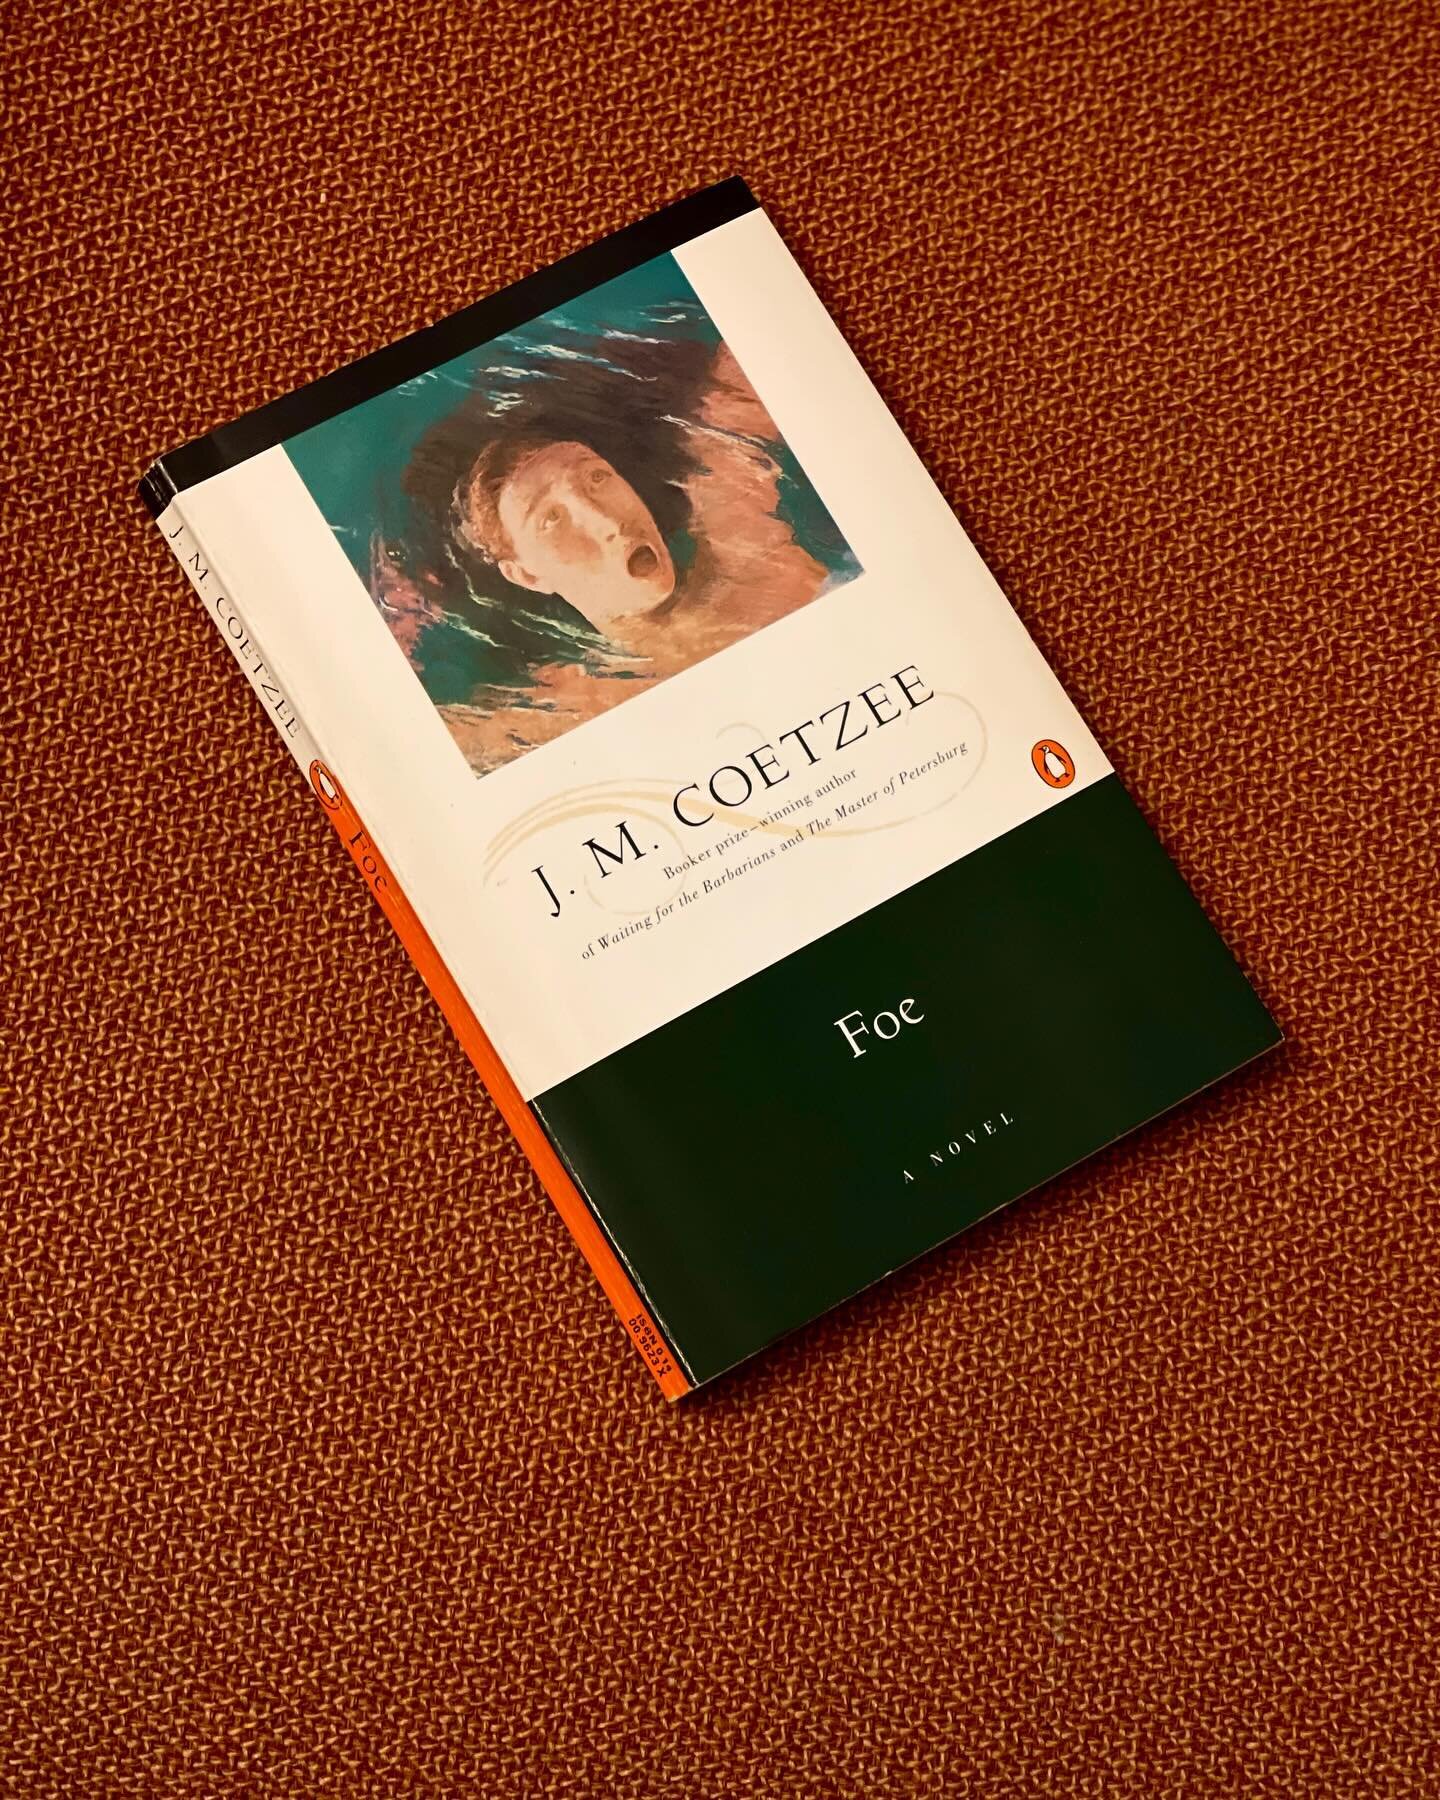 JM Coetzee, Foe (1986).
:
This is a magnificent tale where Coetzee writes almost a conspiracy theory around the composition of Daniel Defoe&rsquo;s Robinson Crusoe! 

***SPOILERS***
Susan Barton looking for her kidnapped daughter ends up in the islan